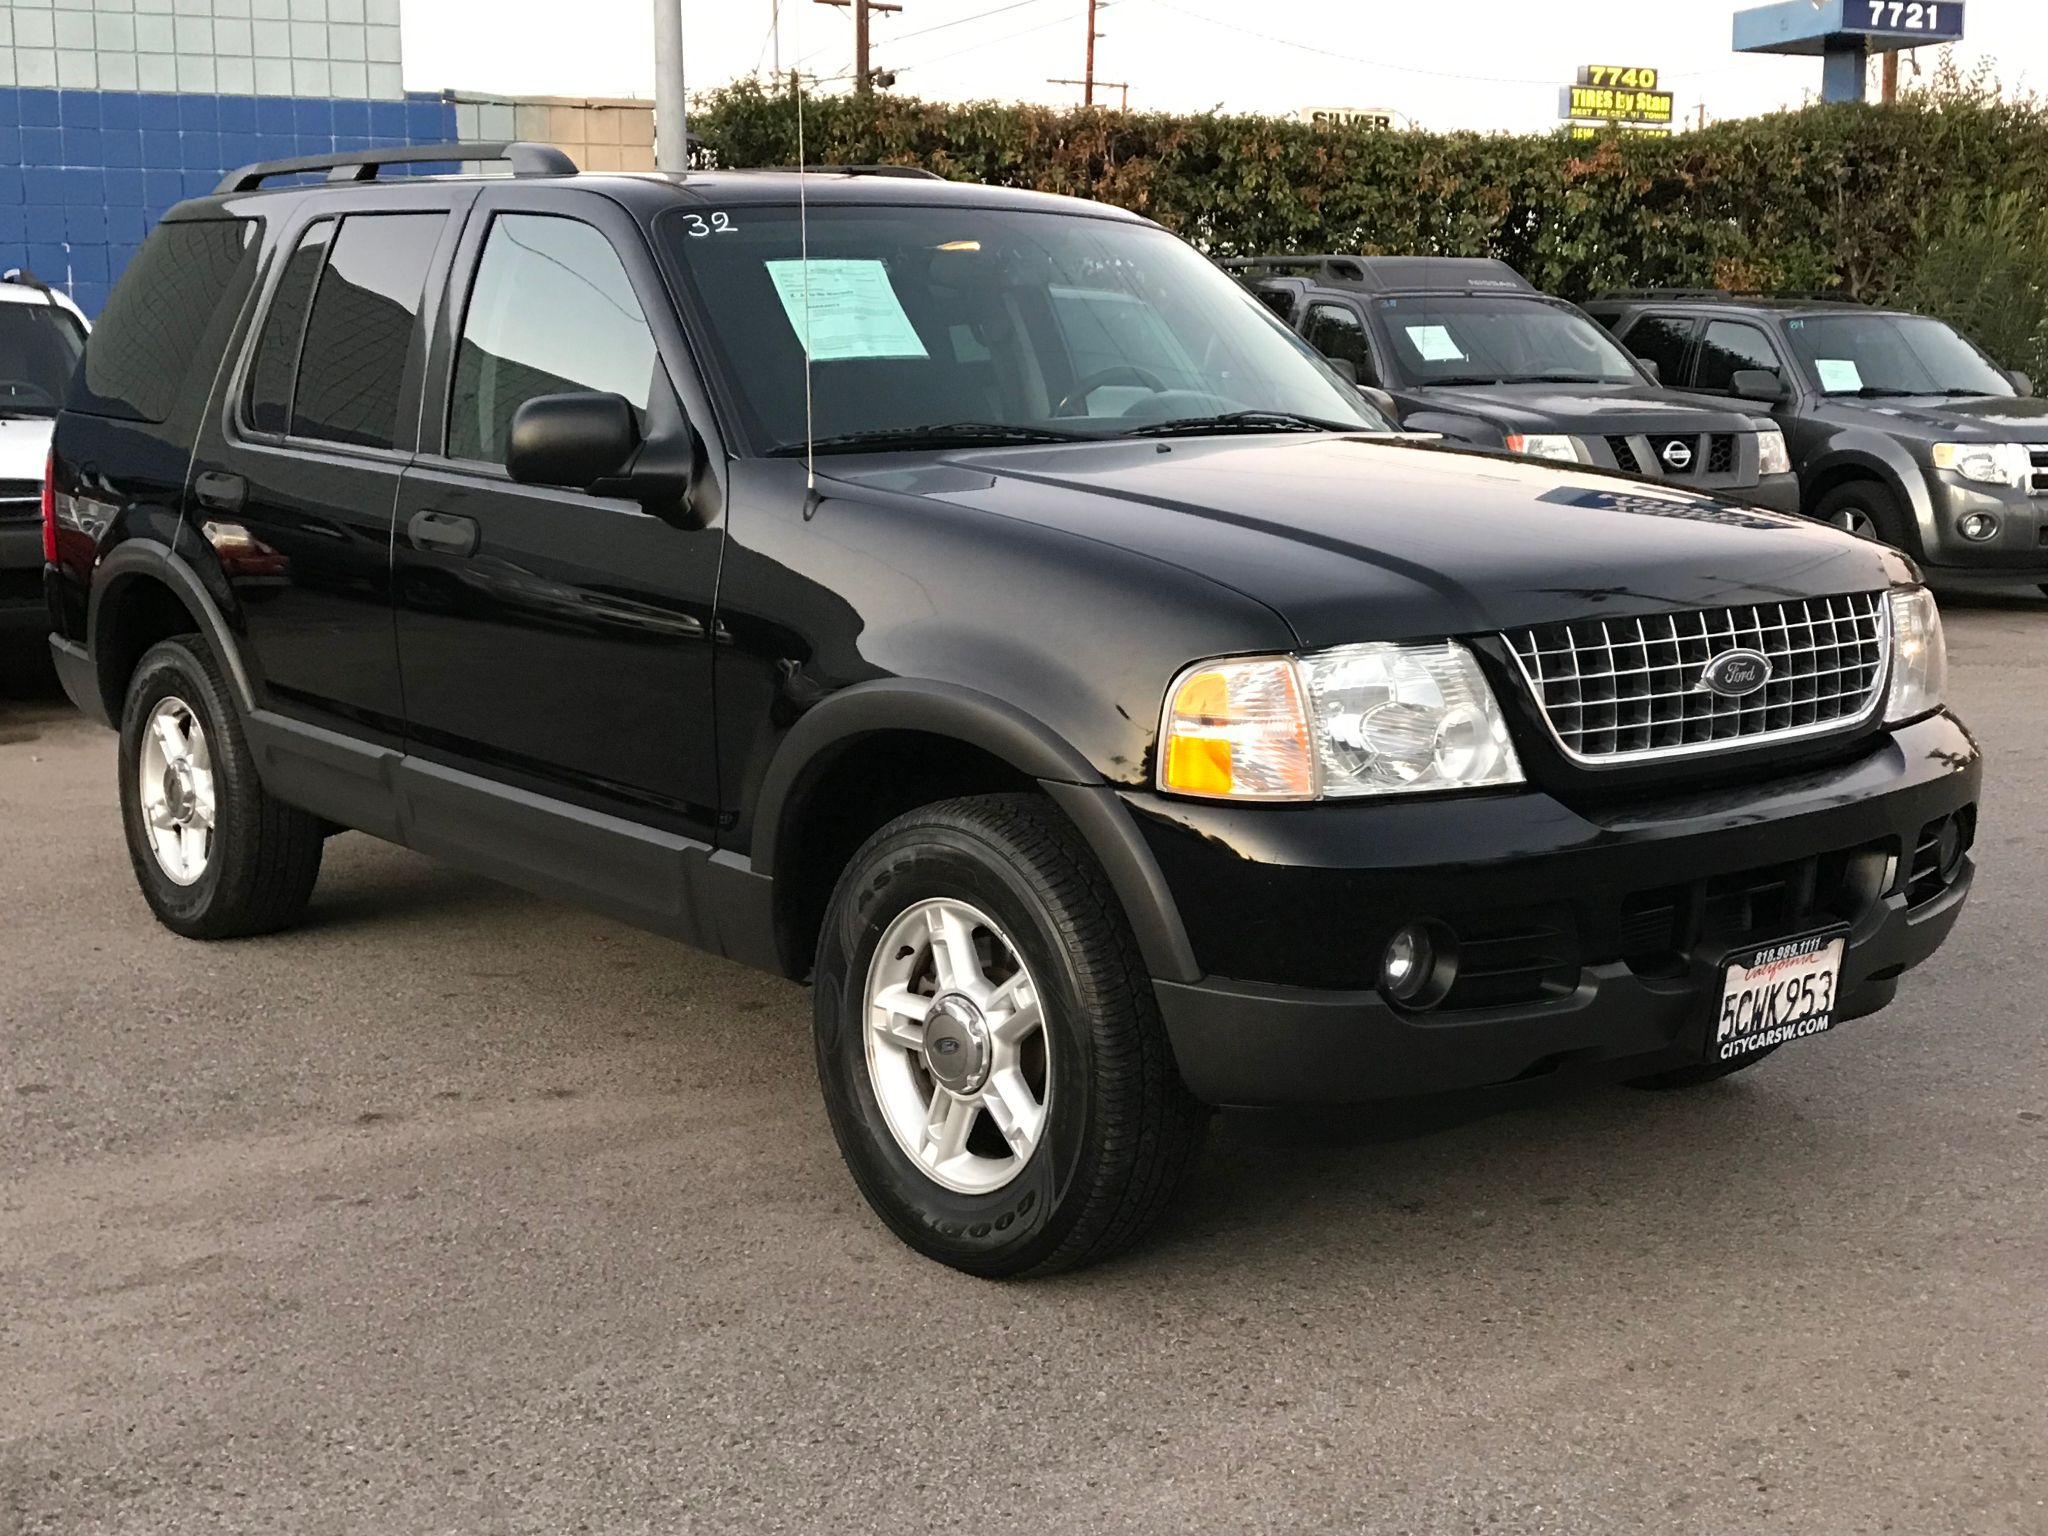 Used 2003 Ford Explorer XLT at City Cars Warehouse INC